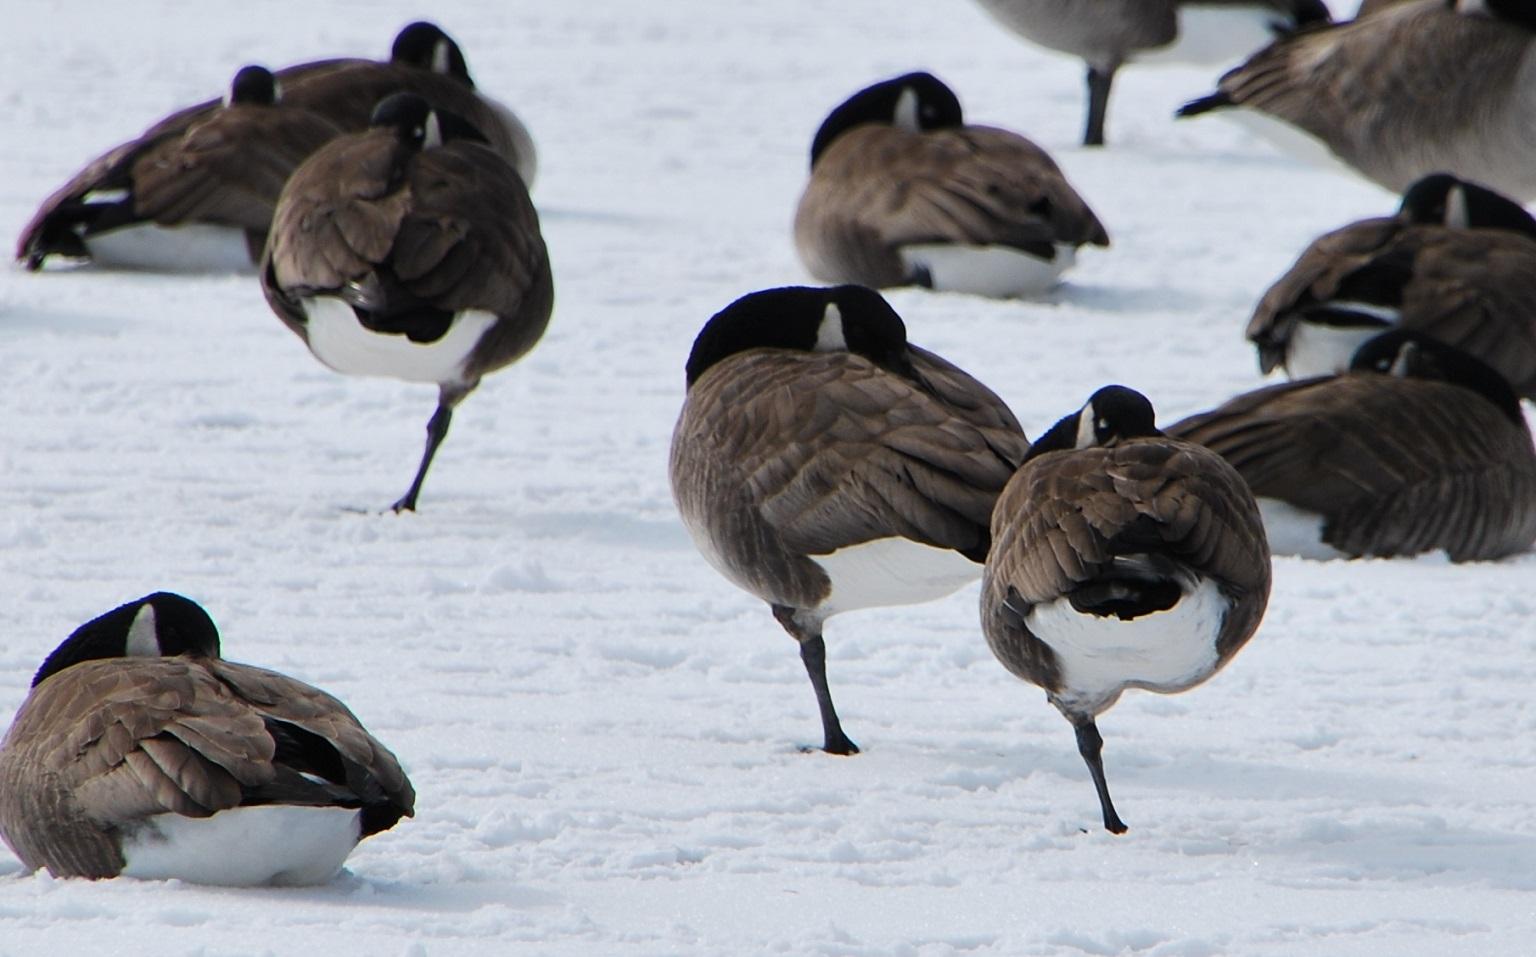 Canada geese conserving body heat by standing on one leg (Ted / Flickr)